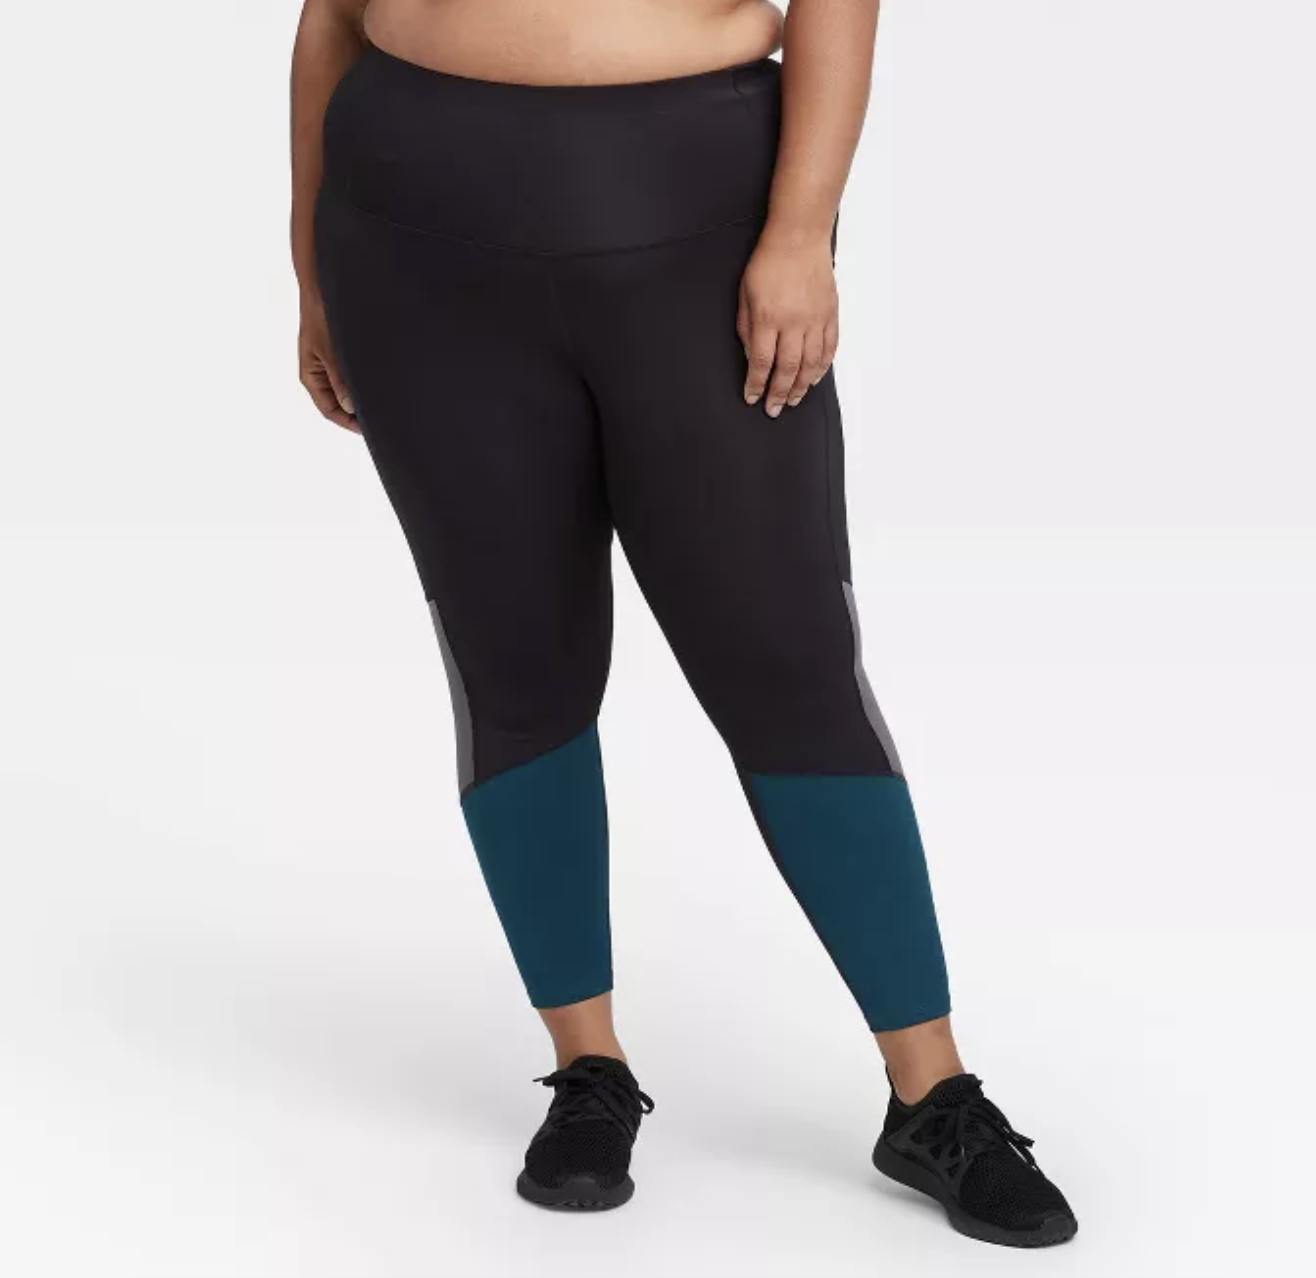 30 Pieces Of Fitness Clothing From Target You'll Probably Want For Your ...